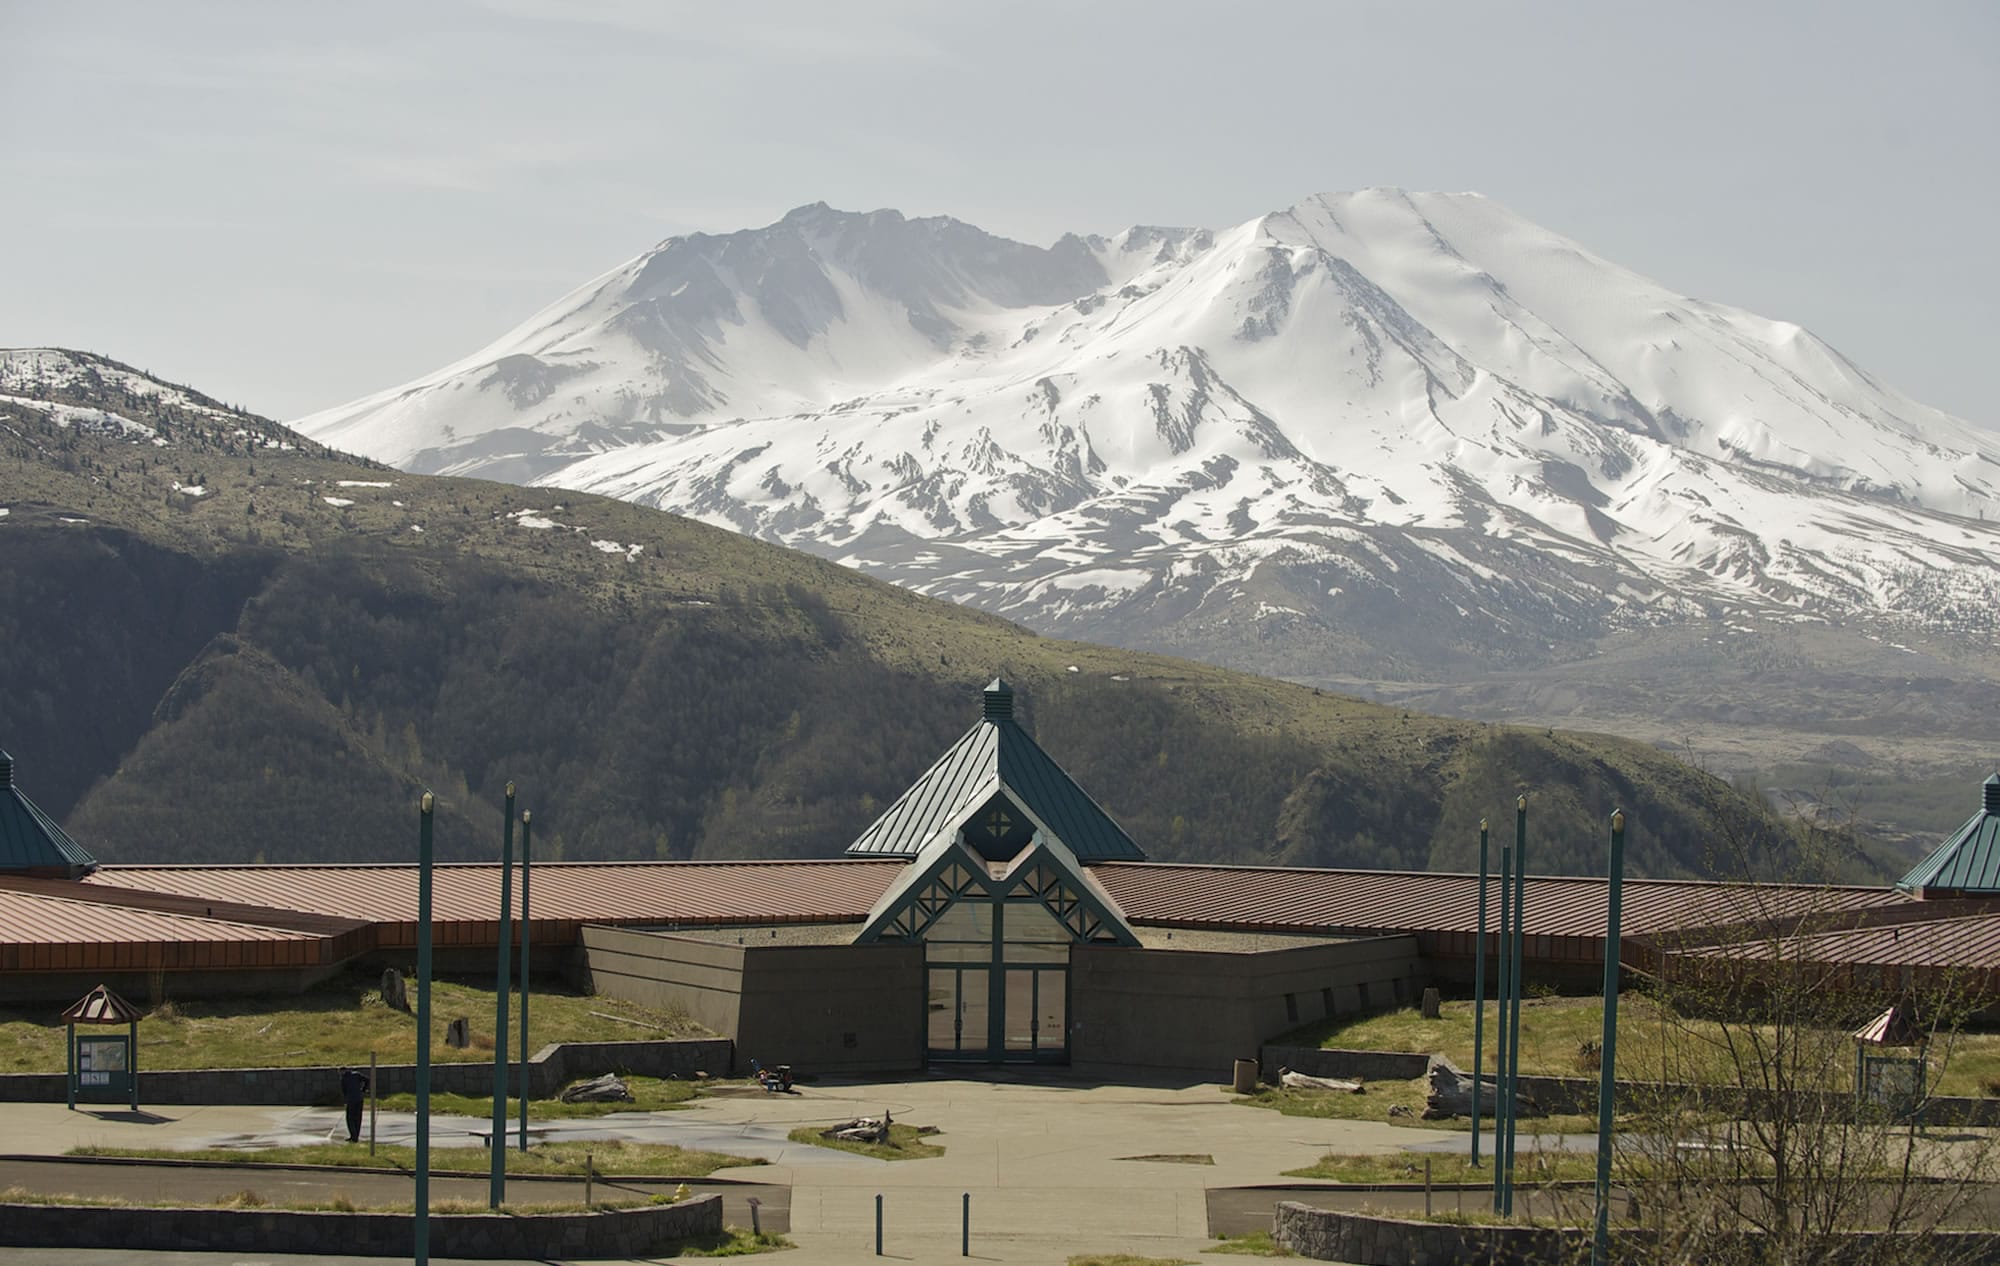 The federal budget cuts imposed by the sequester are impacting research and monitoring activities at volcanoes throughout the United States. At Mount St. Helens, pictured here, cuts have caused cancellation of a planned open house at the observatory, which had been set for May 4. The U.S. Geological Survey, which operates the Cascades Volcano Observatory, has also implemented a hiring freeze, cut participation in scientific conferences and canceled all non-mandatory, non-critical training in response to the budget cuts.